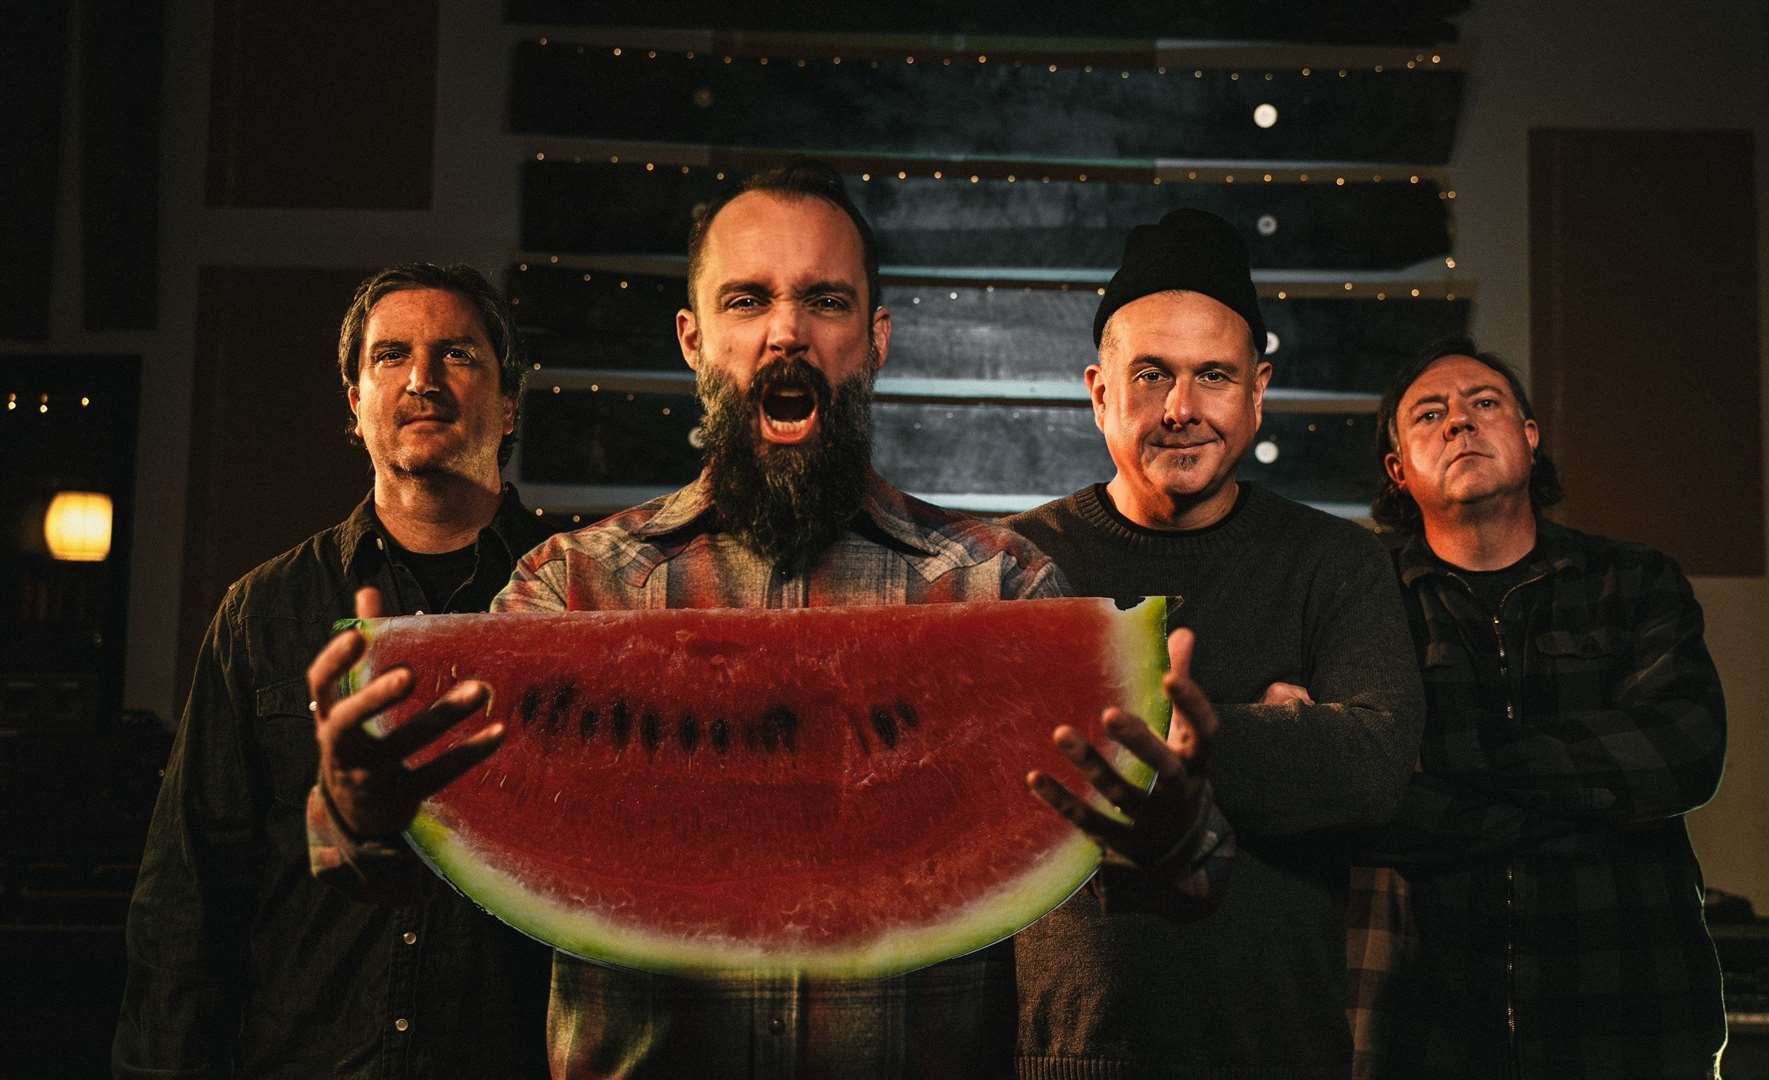 Clutch (carrying a watermelon but not Dirty Dancing style), will have a residency at Ramblin Man Fair